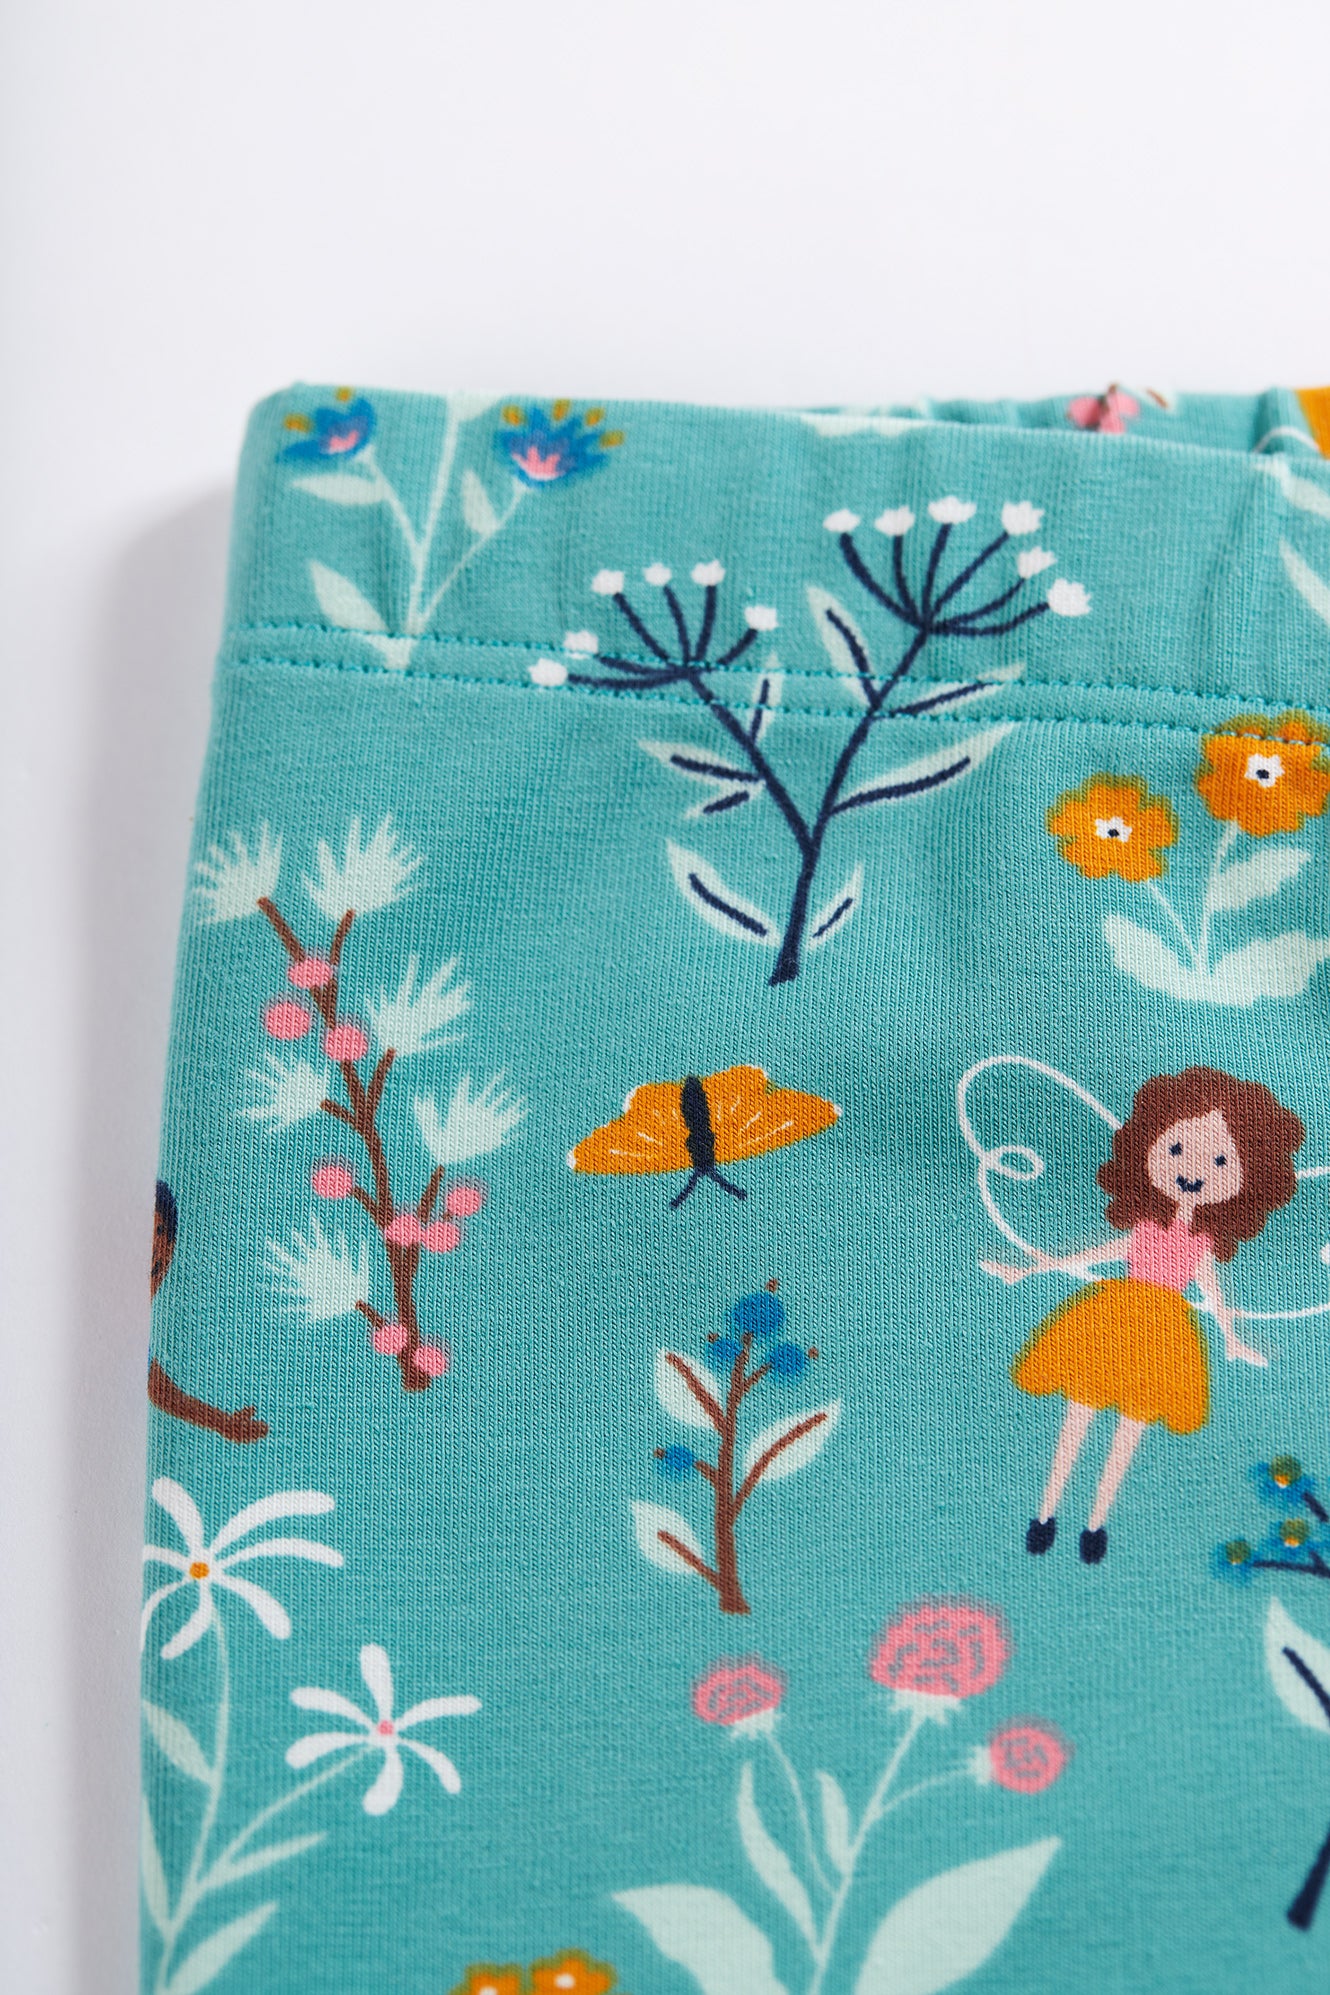 Frugi Libby Printed Leggings - Moss Forest Fairies